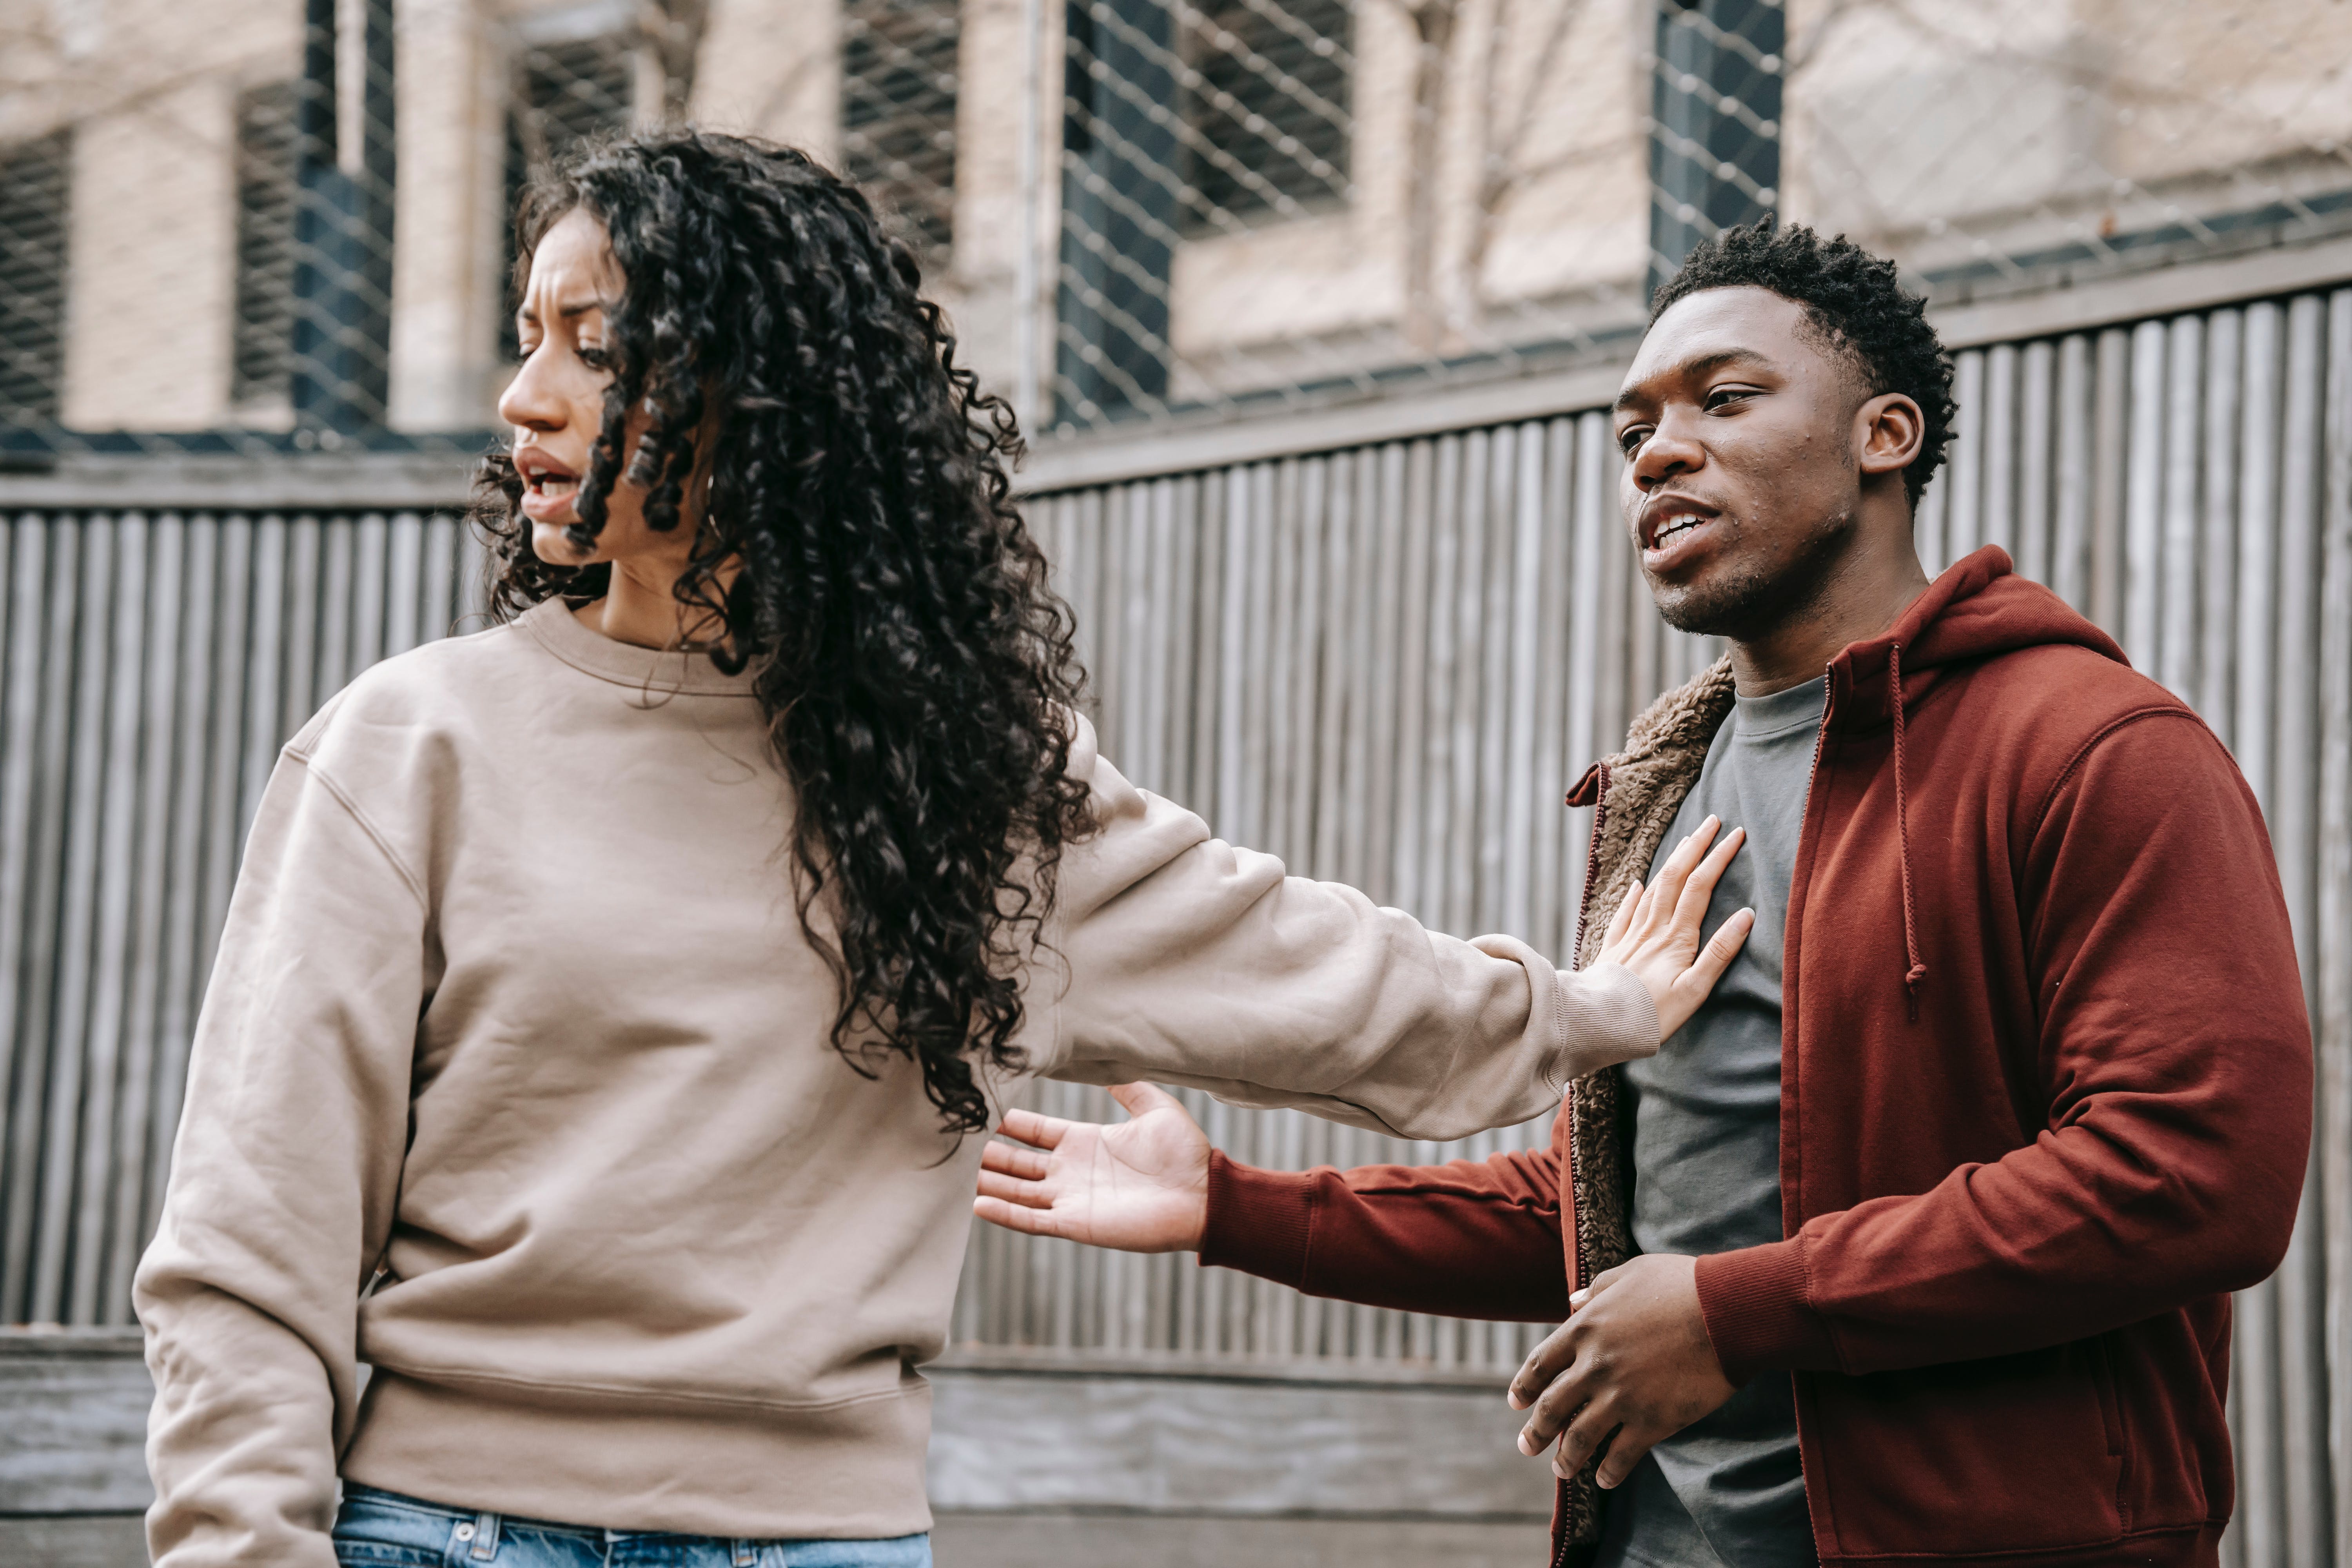 A man and woman in the middle of a disagreement with the latter pushing the former away | Source: Pexels